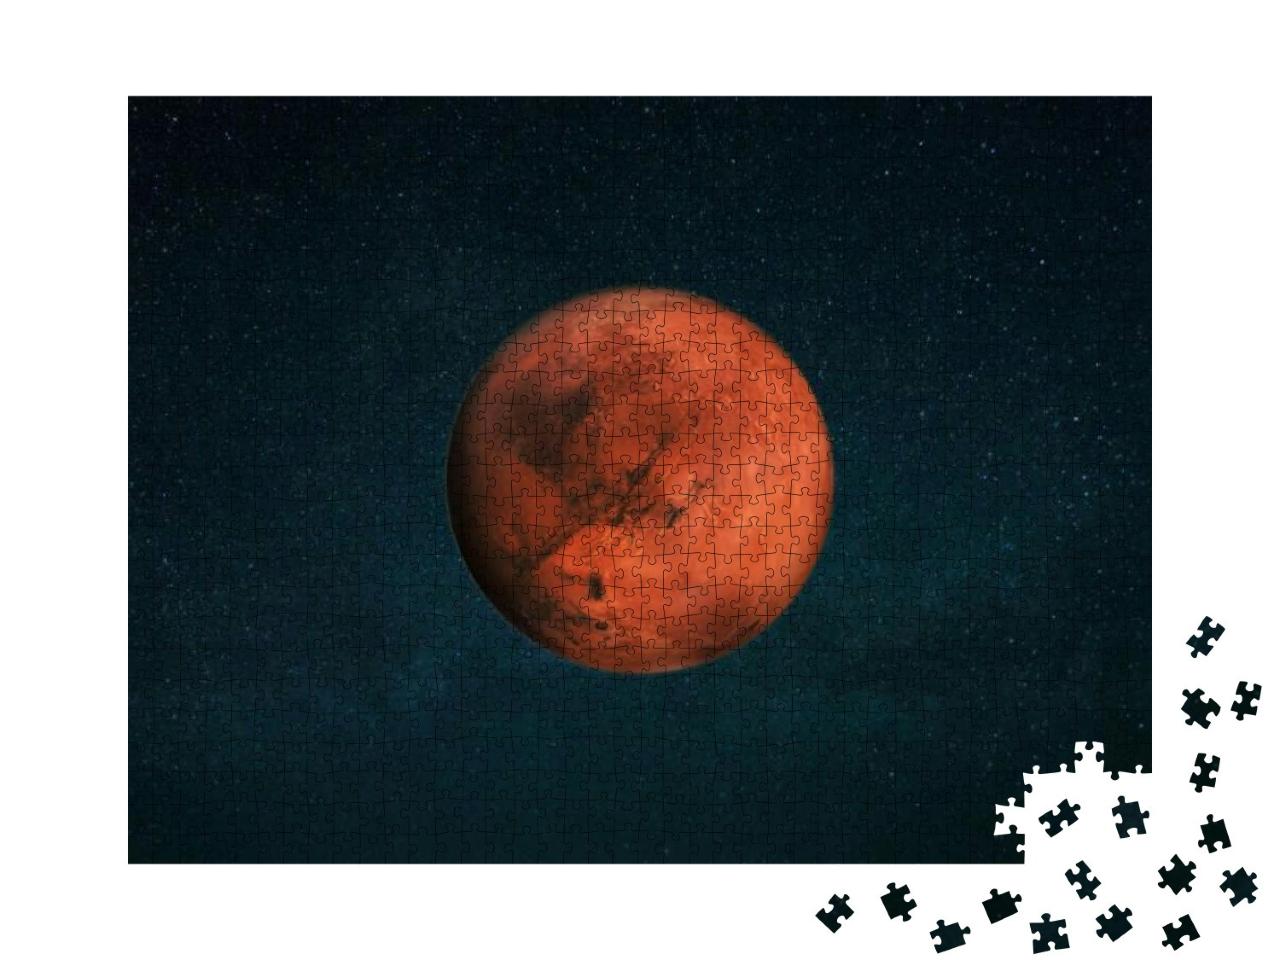 Puzzle 1000 Teile „Der Planet Mars am Sternenhimmel, roter Planet, Weltraum“